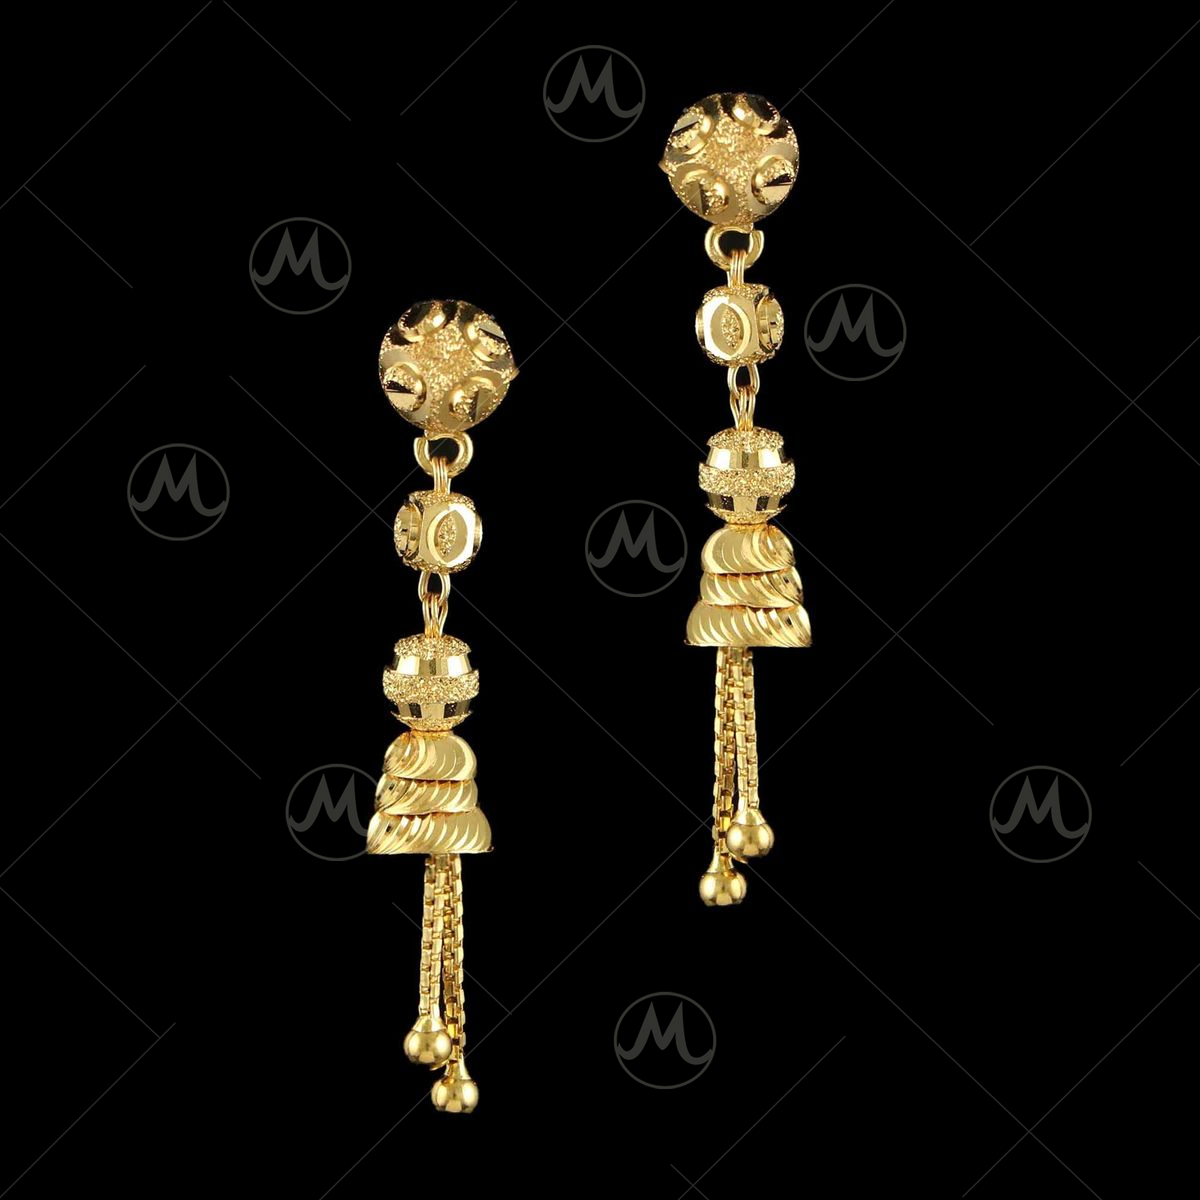 Buy quality Gold Mini Casting Earring in Ahmedabad